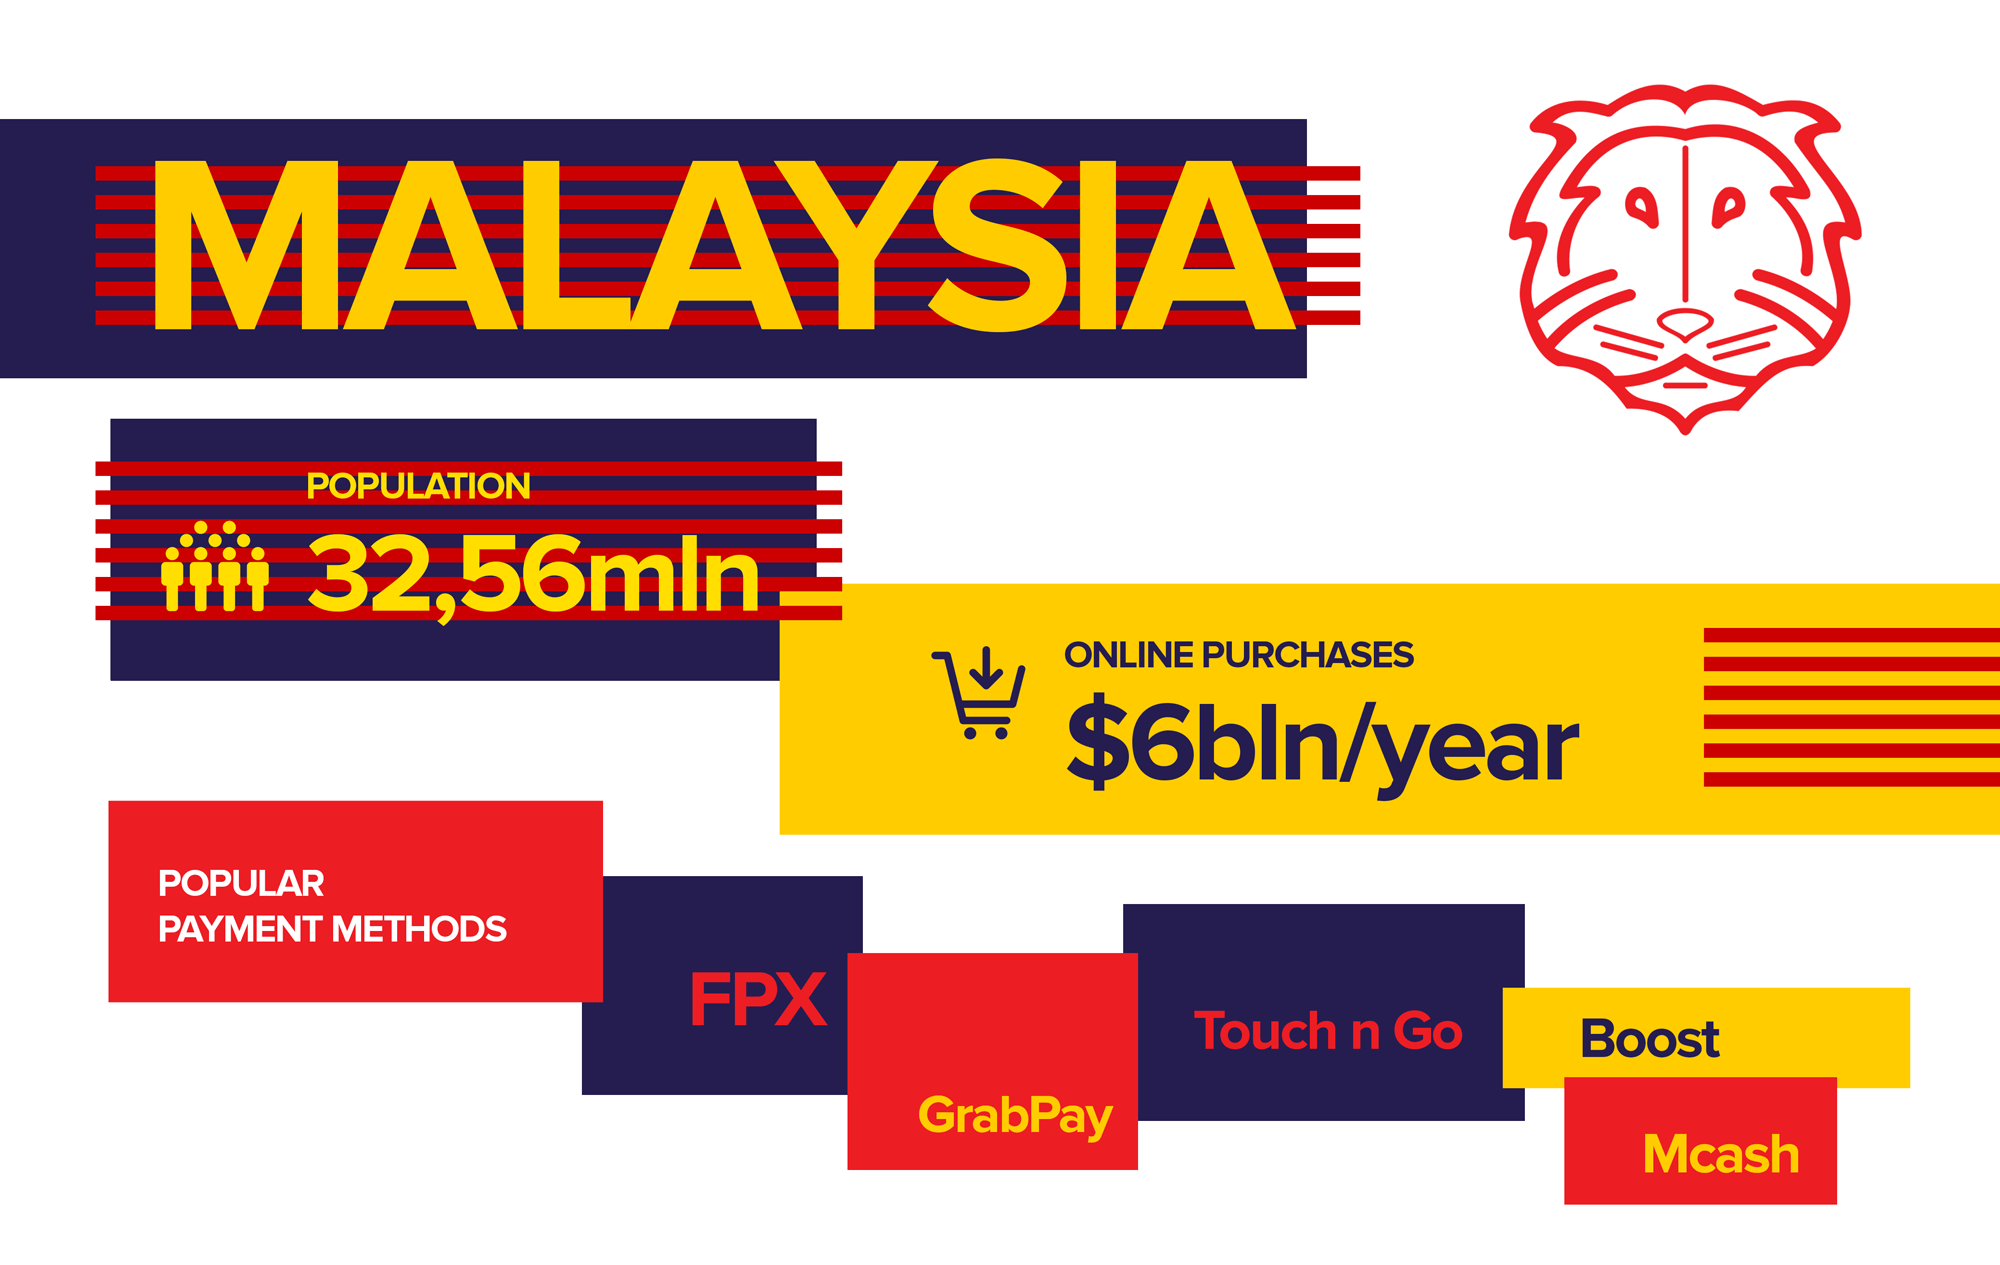 Specifics of Malaysian payments market